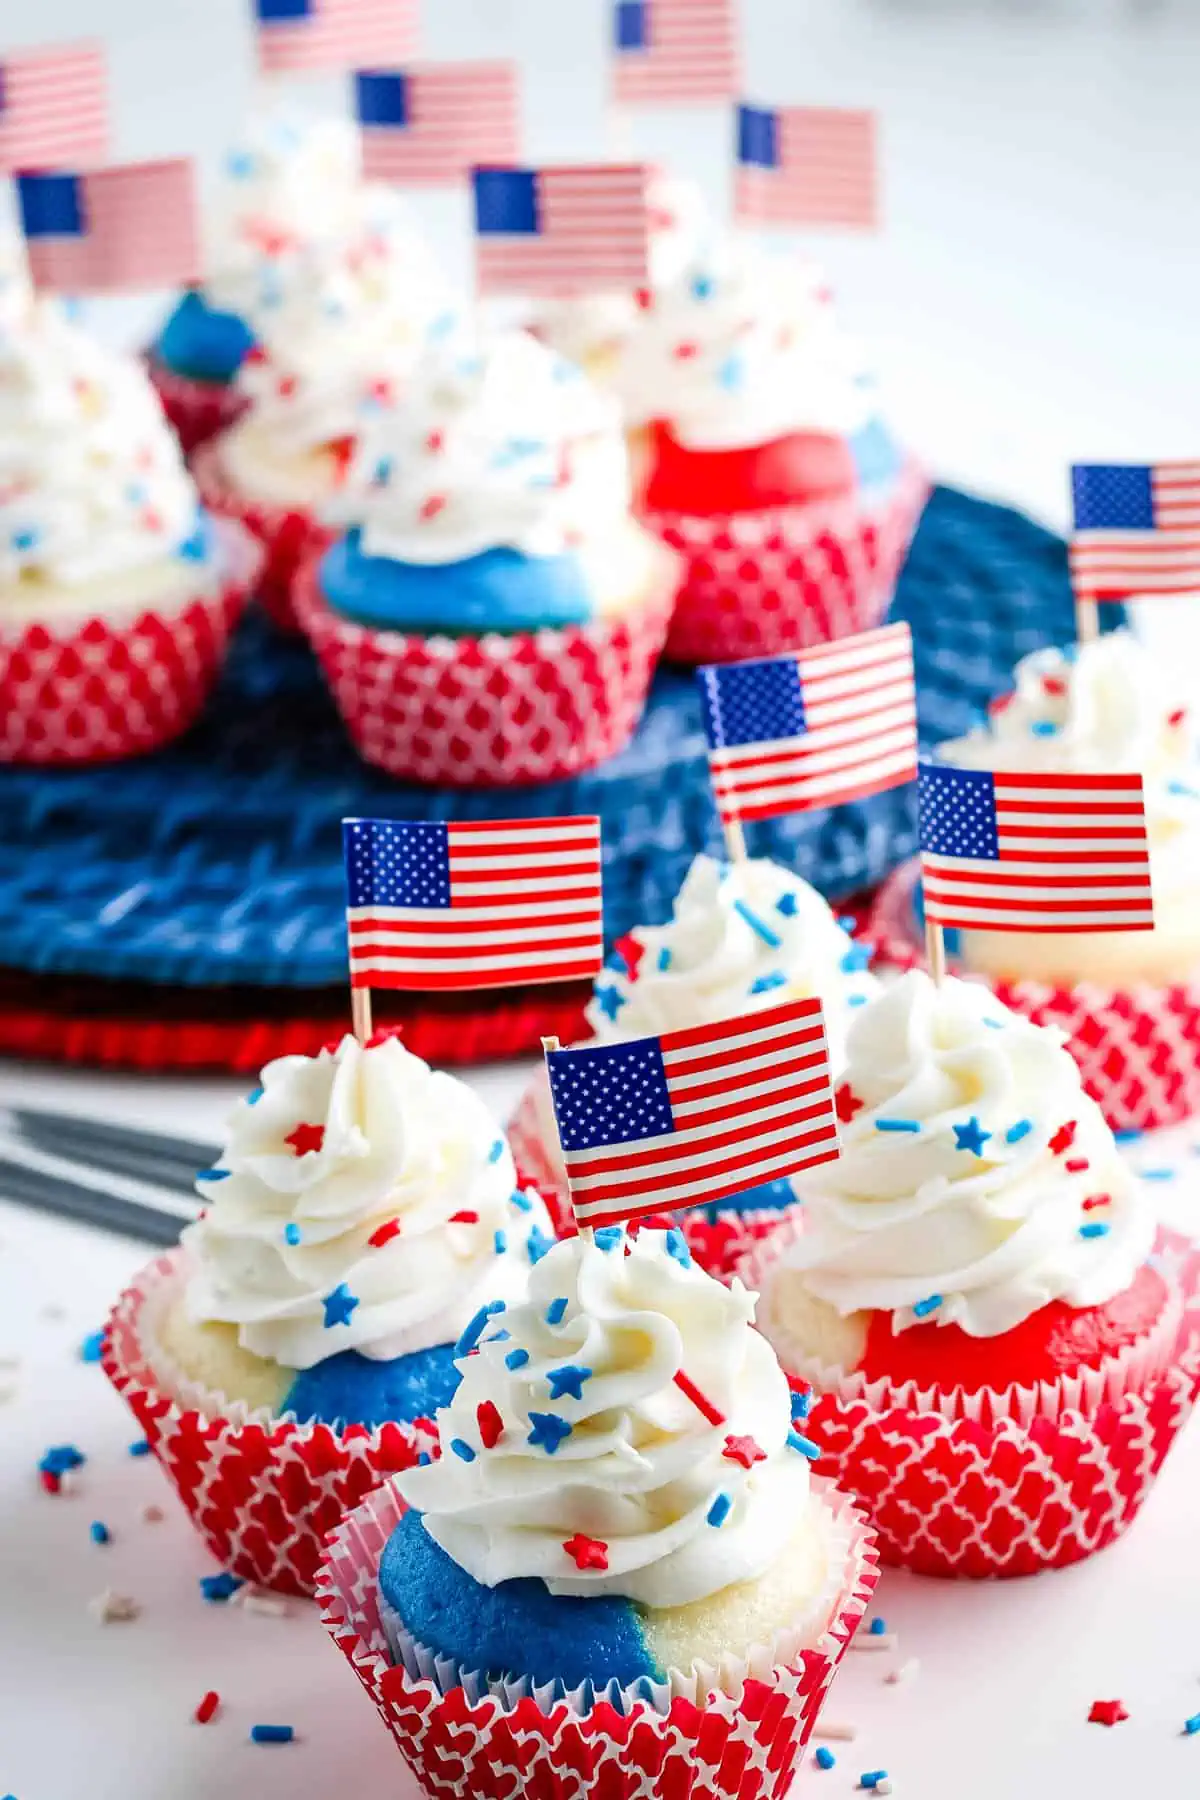 red white and blue cupcakes decorated as July 4th cupcakes with buttercream frosting, sprinkles, and American flag toppers